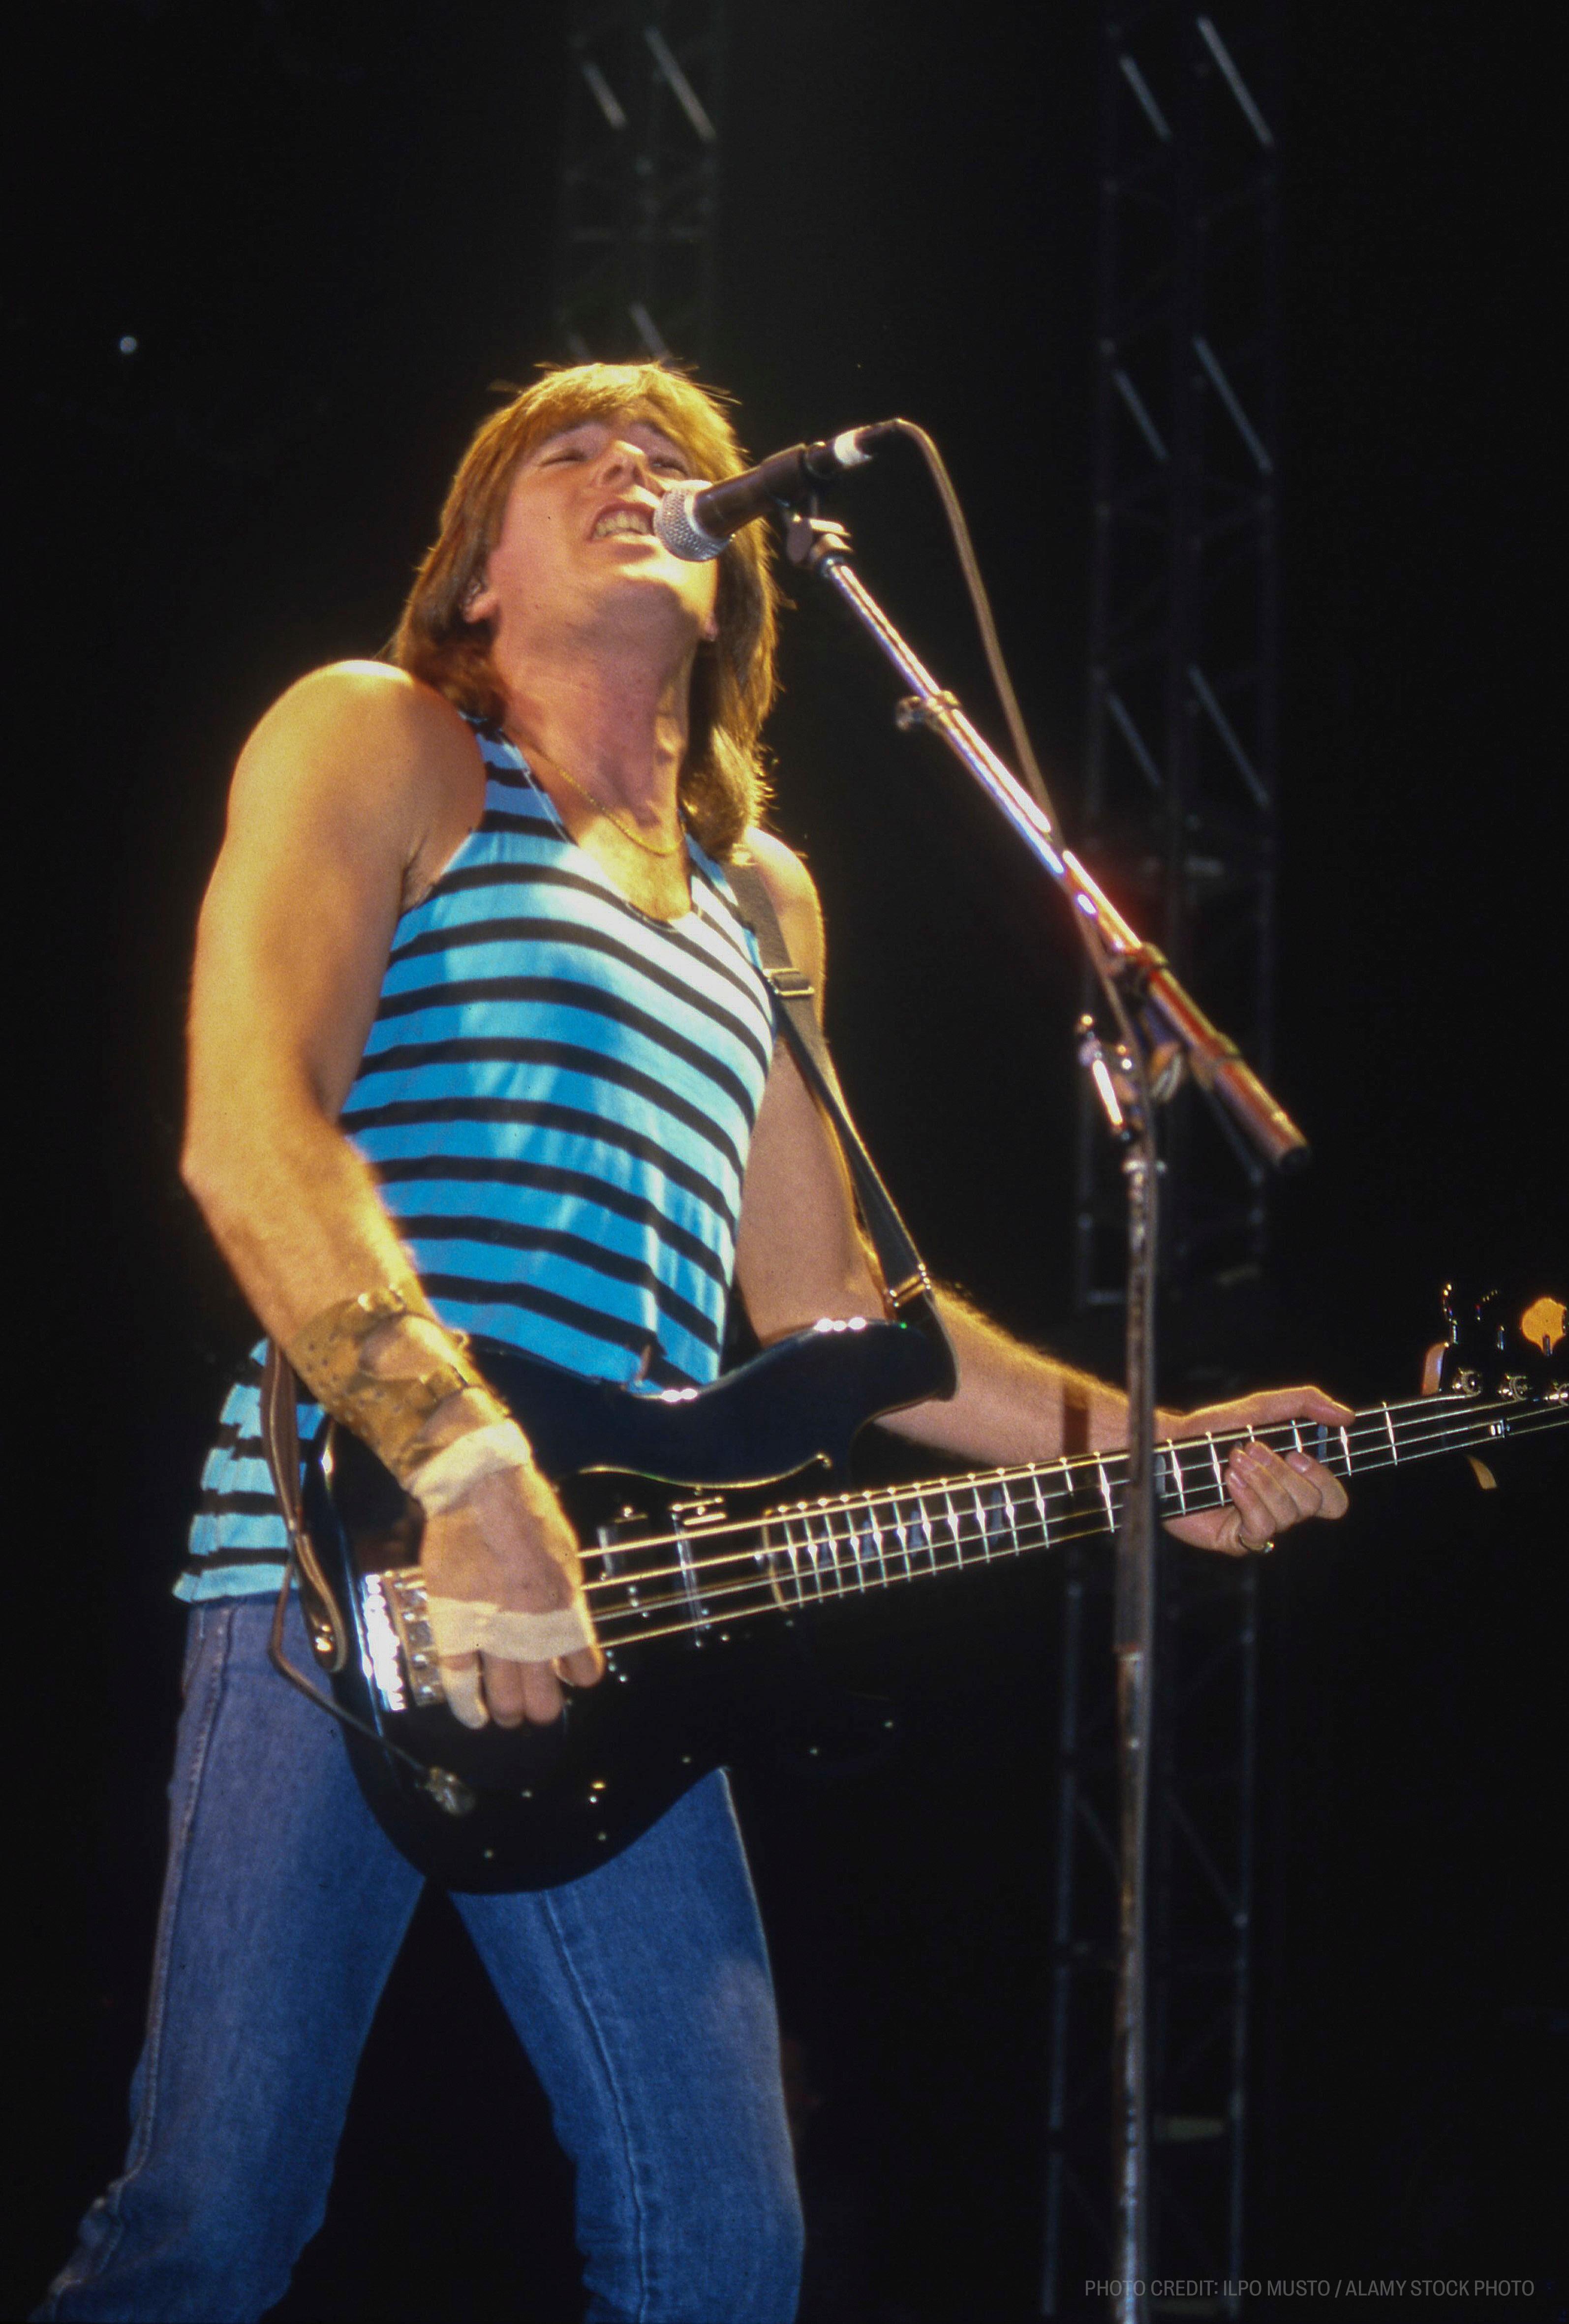 a man singing into a microphone while playing a bass guitar